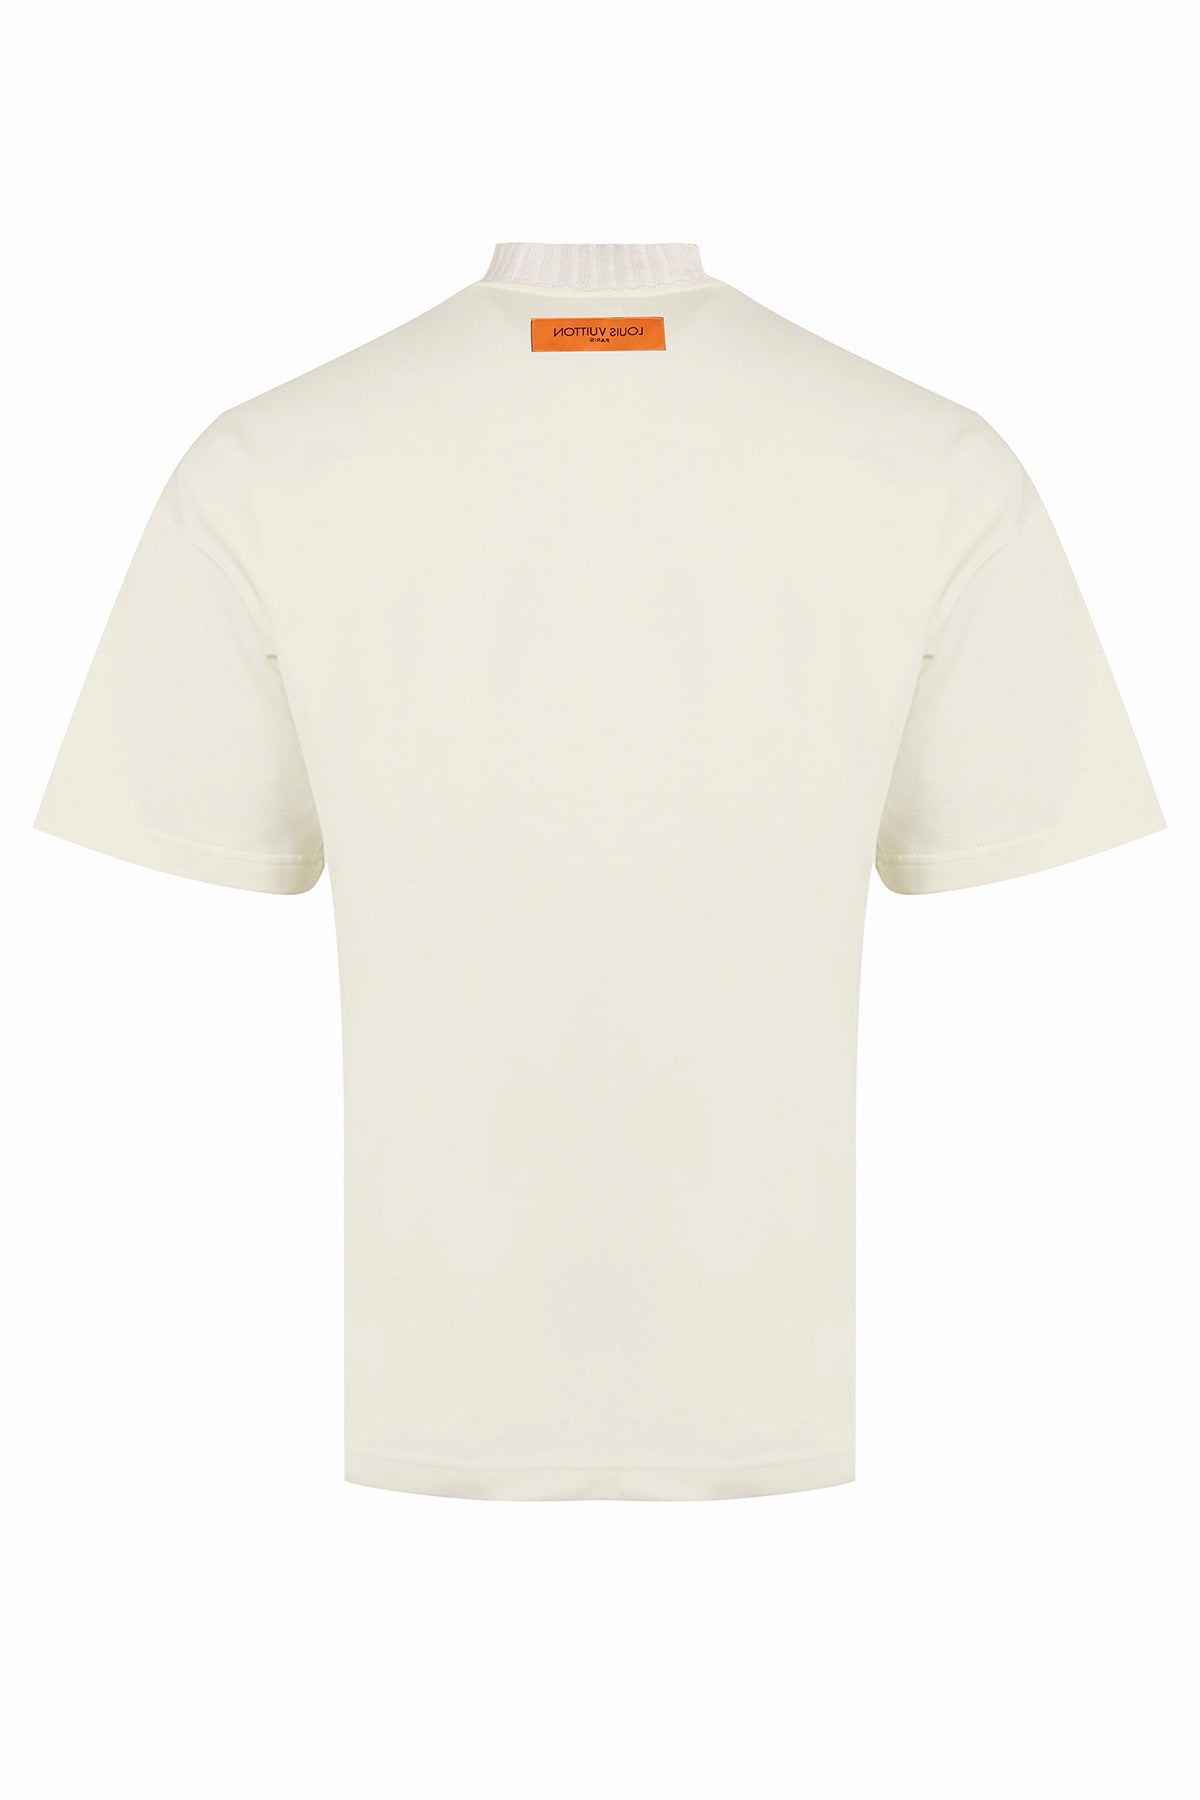 Louis Vuitton Embroidered louis vuitton mockneck tee (1A9GMO) in 2023